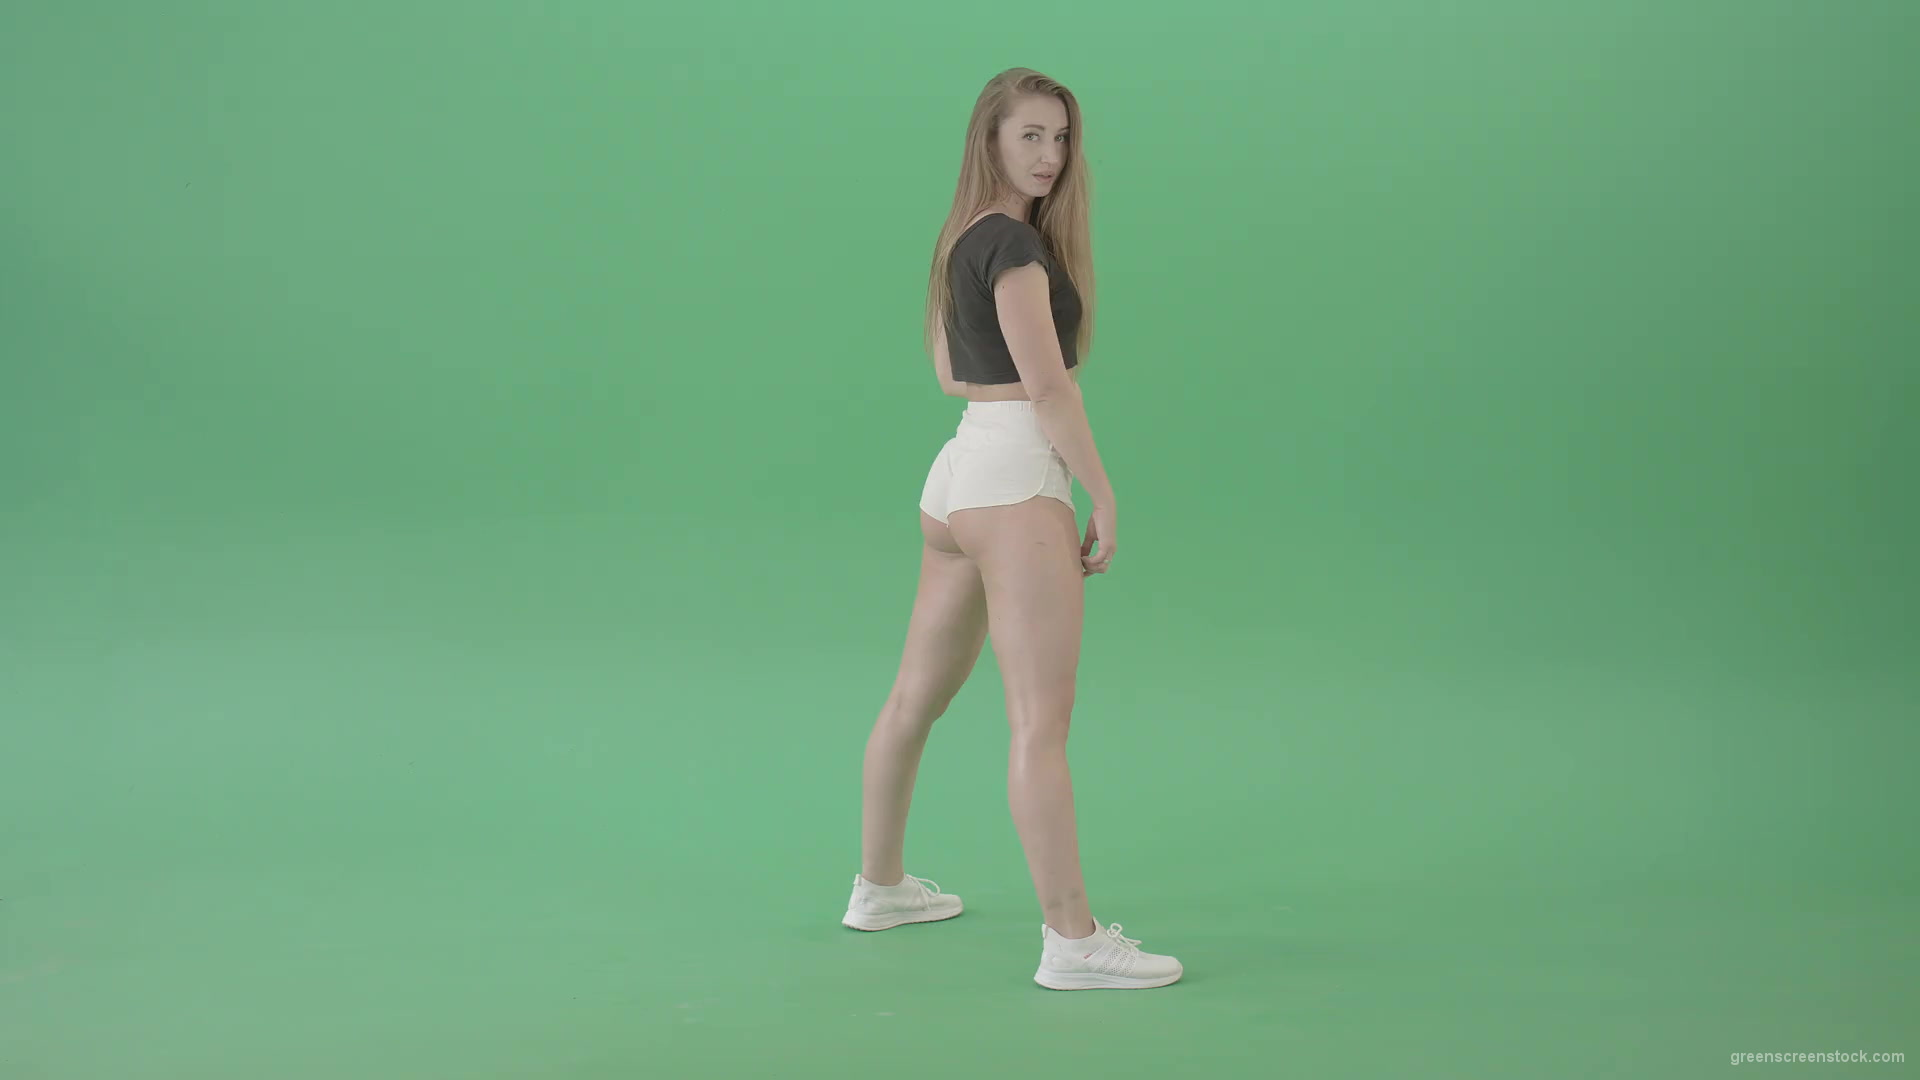 Amazing-young-woman-shaking-ass-in-side-view-twerking-dance-over-green-screen-4K-Video-Footage-1920_001 Green Screen Stock